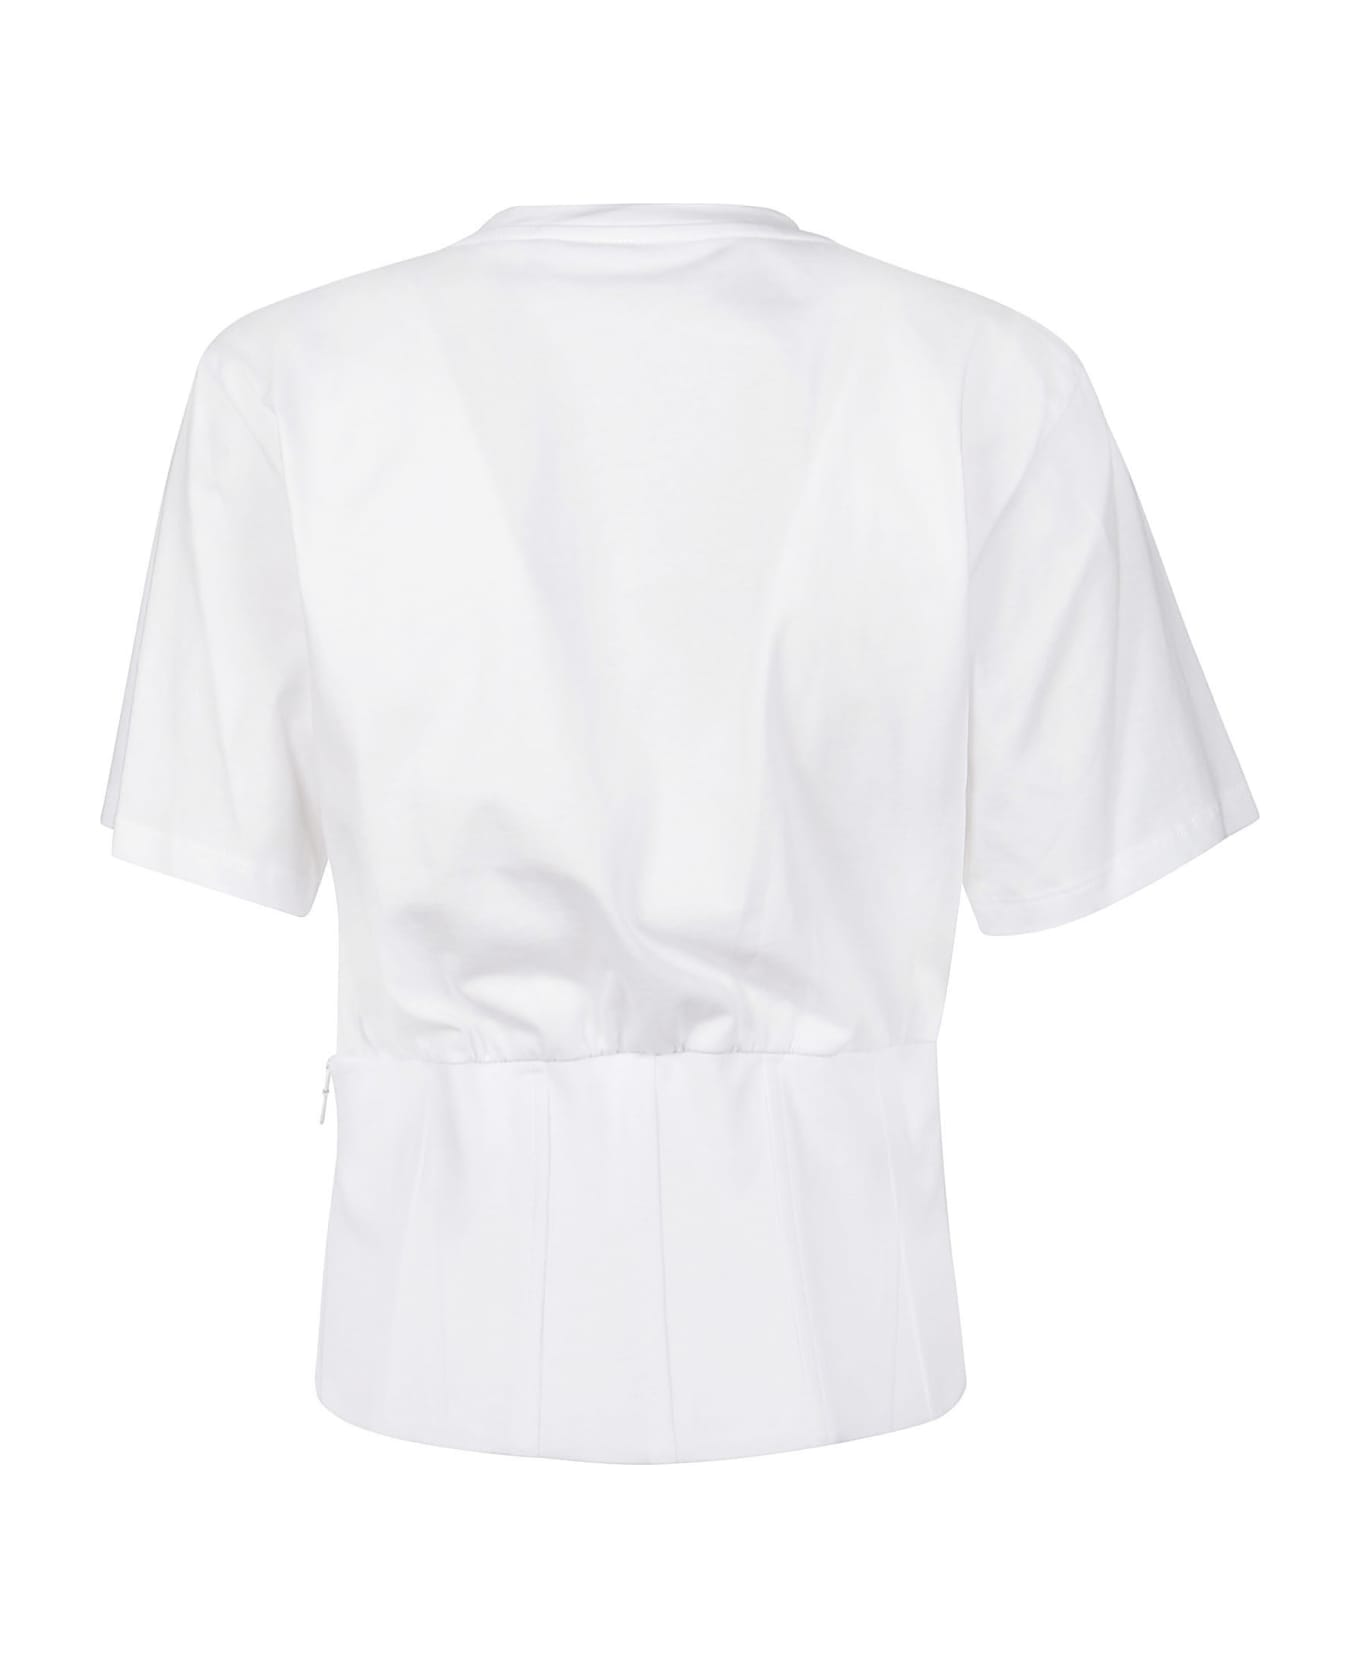 Federica Tosi Pannelled T-shirt - Bianco